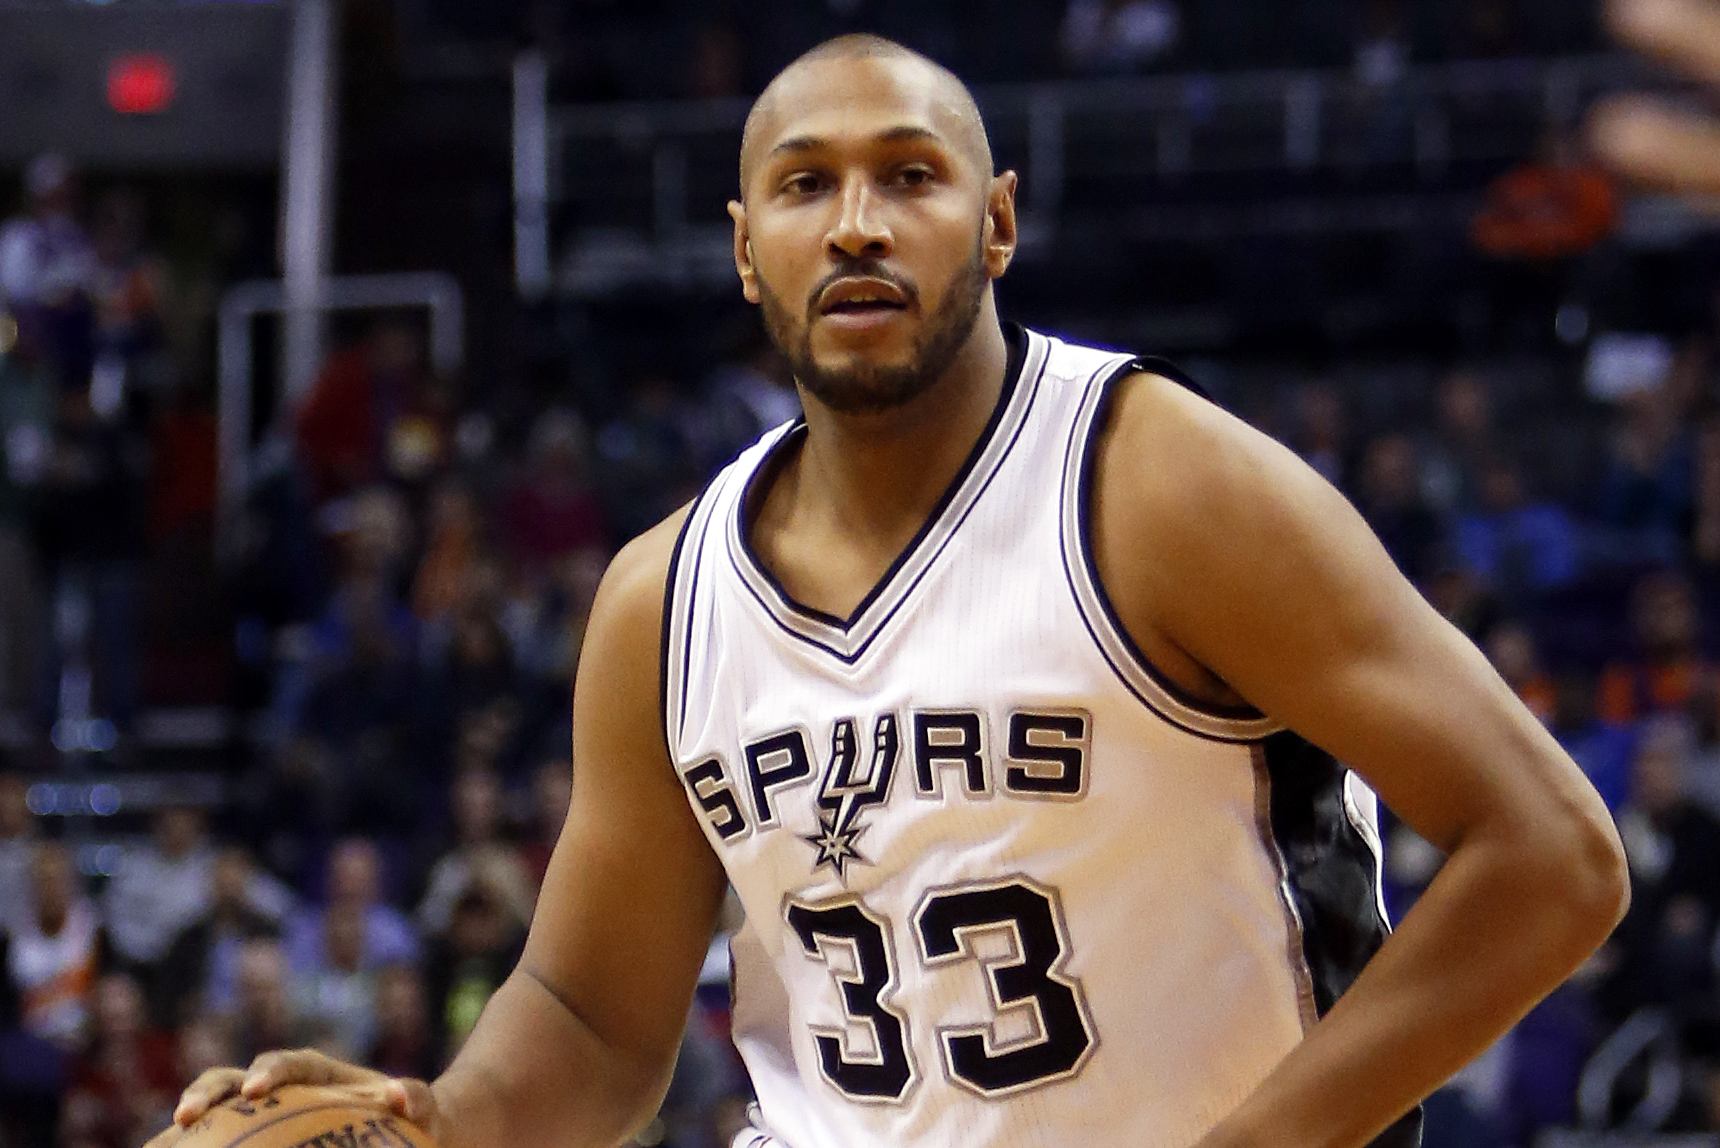 How Boris Diaw's Unconventional Game Helped the Spurs Soar